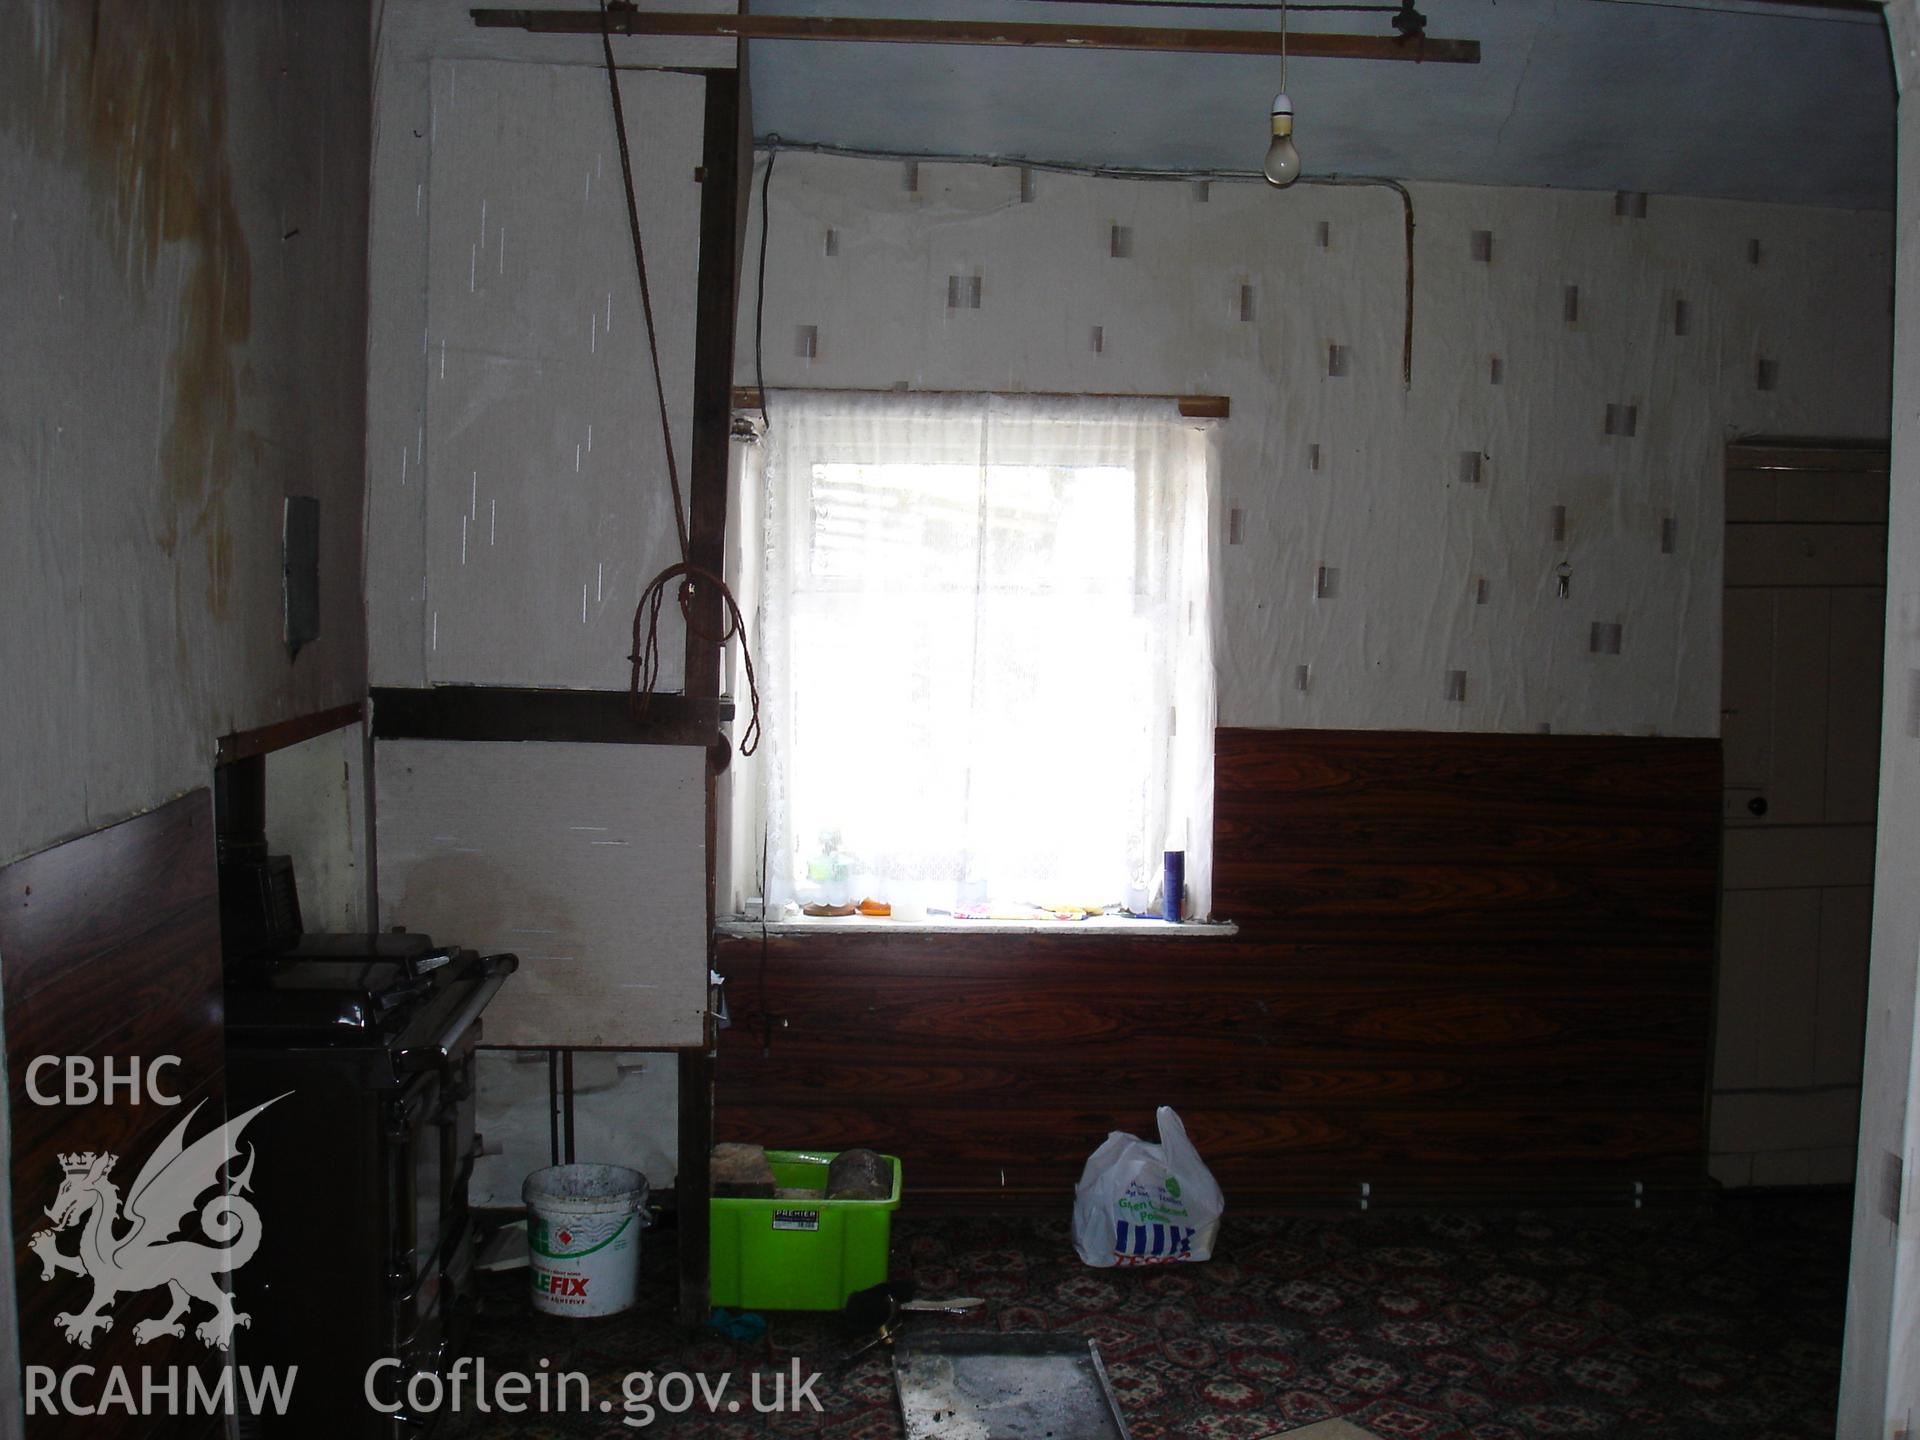 Colour digital photograph showing interior view (rayburn) of a cottage at Gelli Houses, Cymmer.